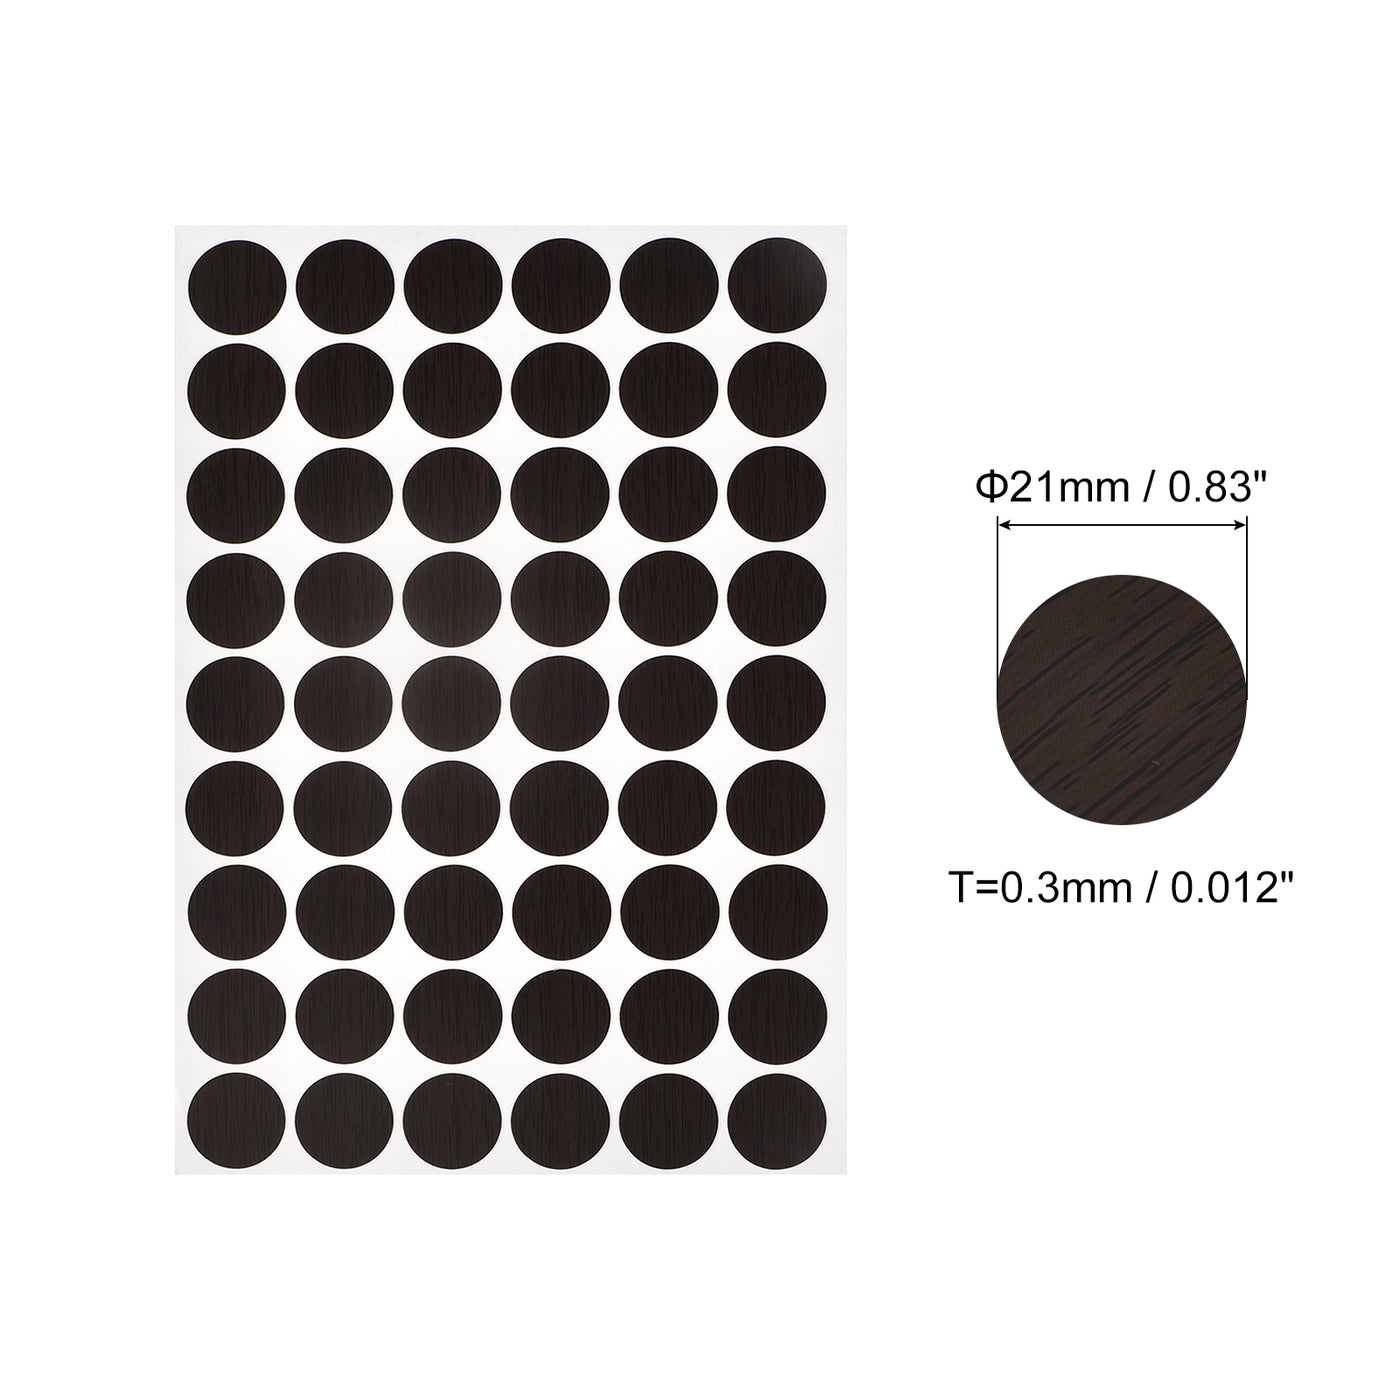 uxcell Uxcell Screw Hole Cover Stickers, 21mm Dia PVC Self Adhesive Covers Caps for Wood Furniture Cabinet Shelf Wardrobe, Black Line 4 Sheet/216pcs